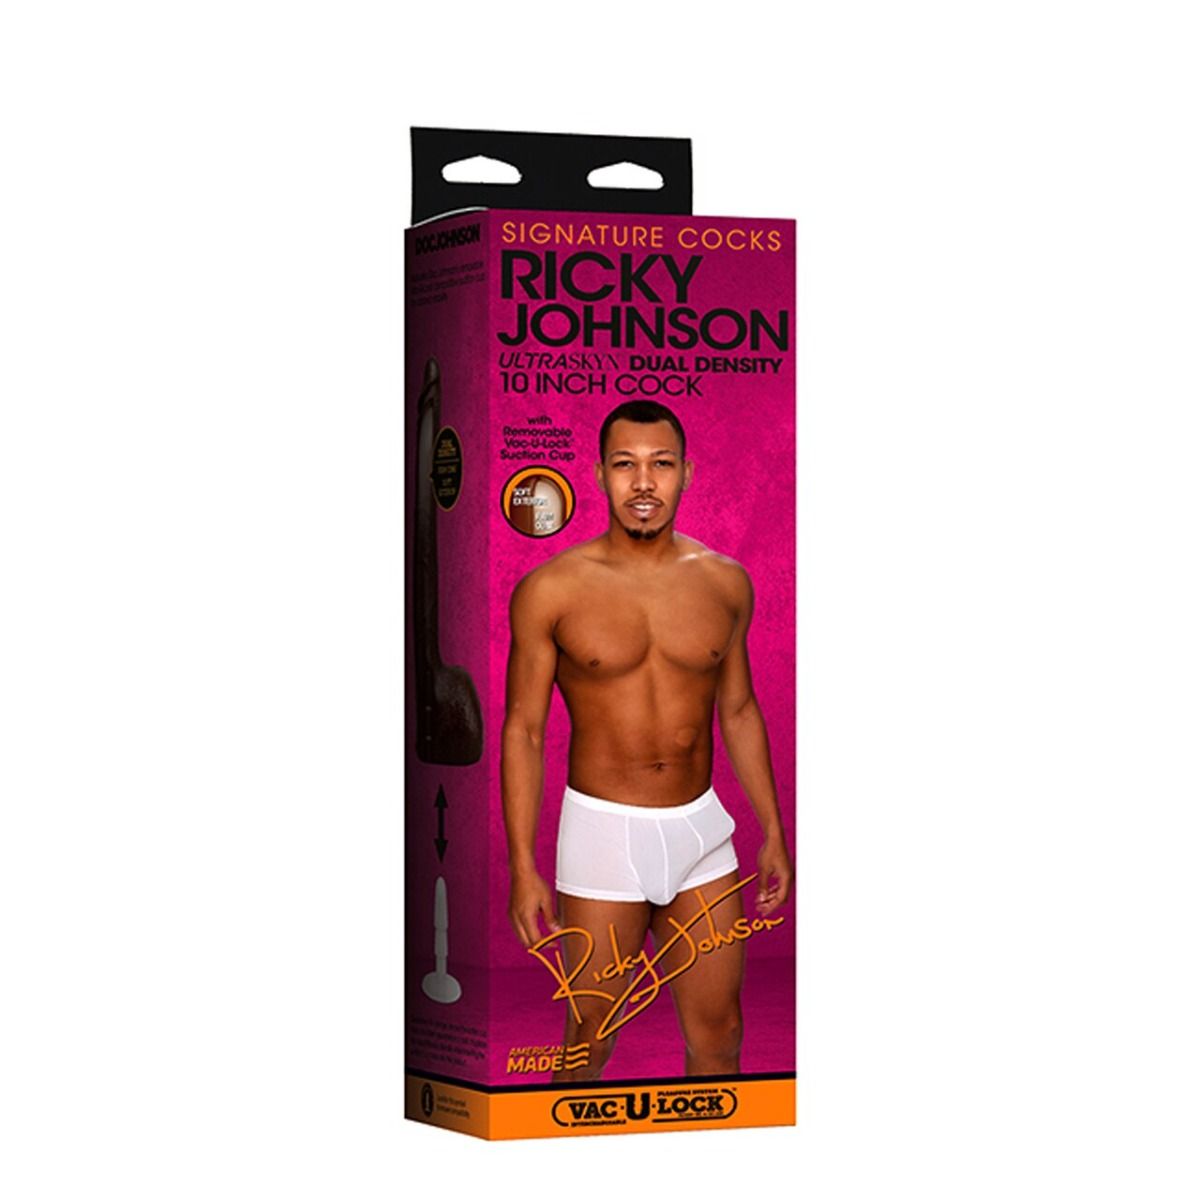 Signature Cocks Ricky Johnson Cock UltraSkyn 10 inch Dildo with Removable Vac-U-Lock Suction Cup (8183714513135)